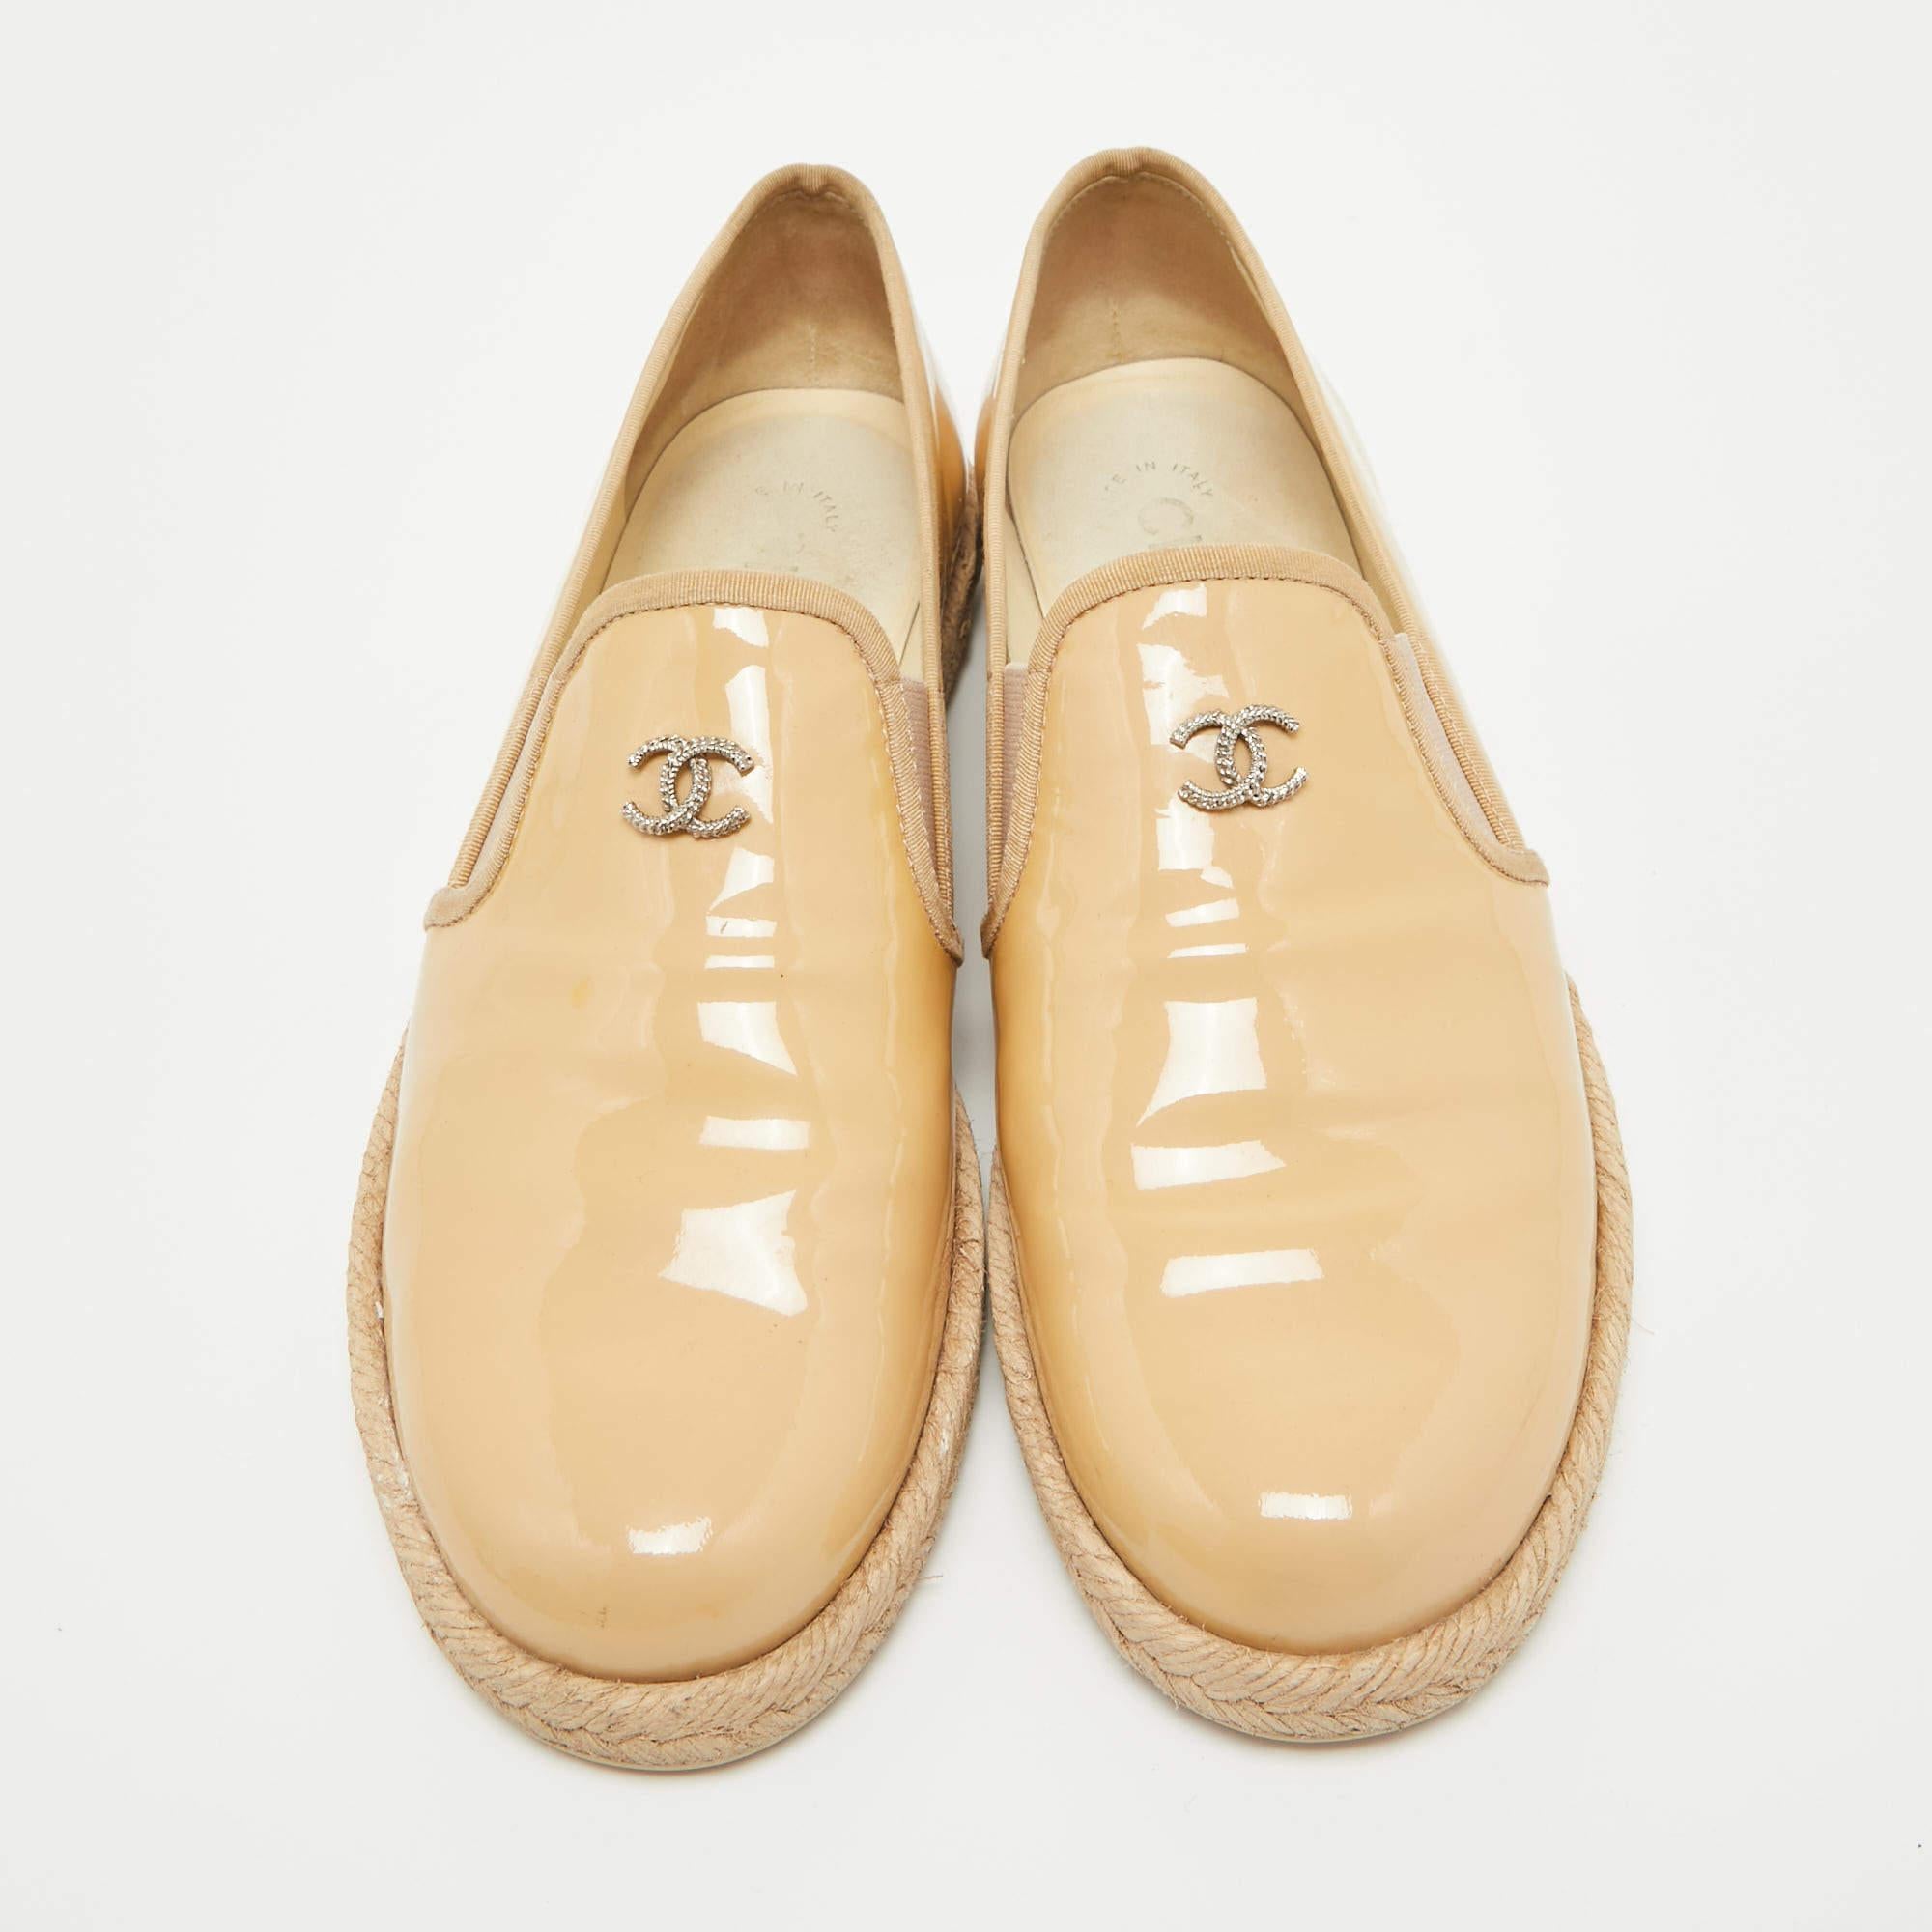 Step out in style every day with these gorgeous espadrilles from Chanel. Featuring a beige patent leather exterior, this round-toe pair is completed with braided jute details on the midsoles and the CC logo on the uppers. Slip these loafers on